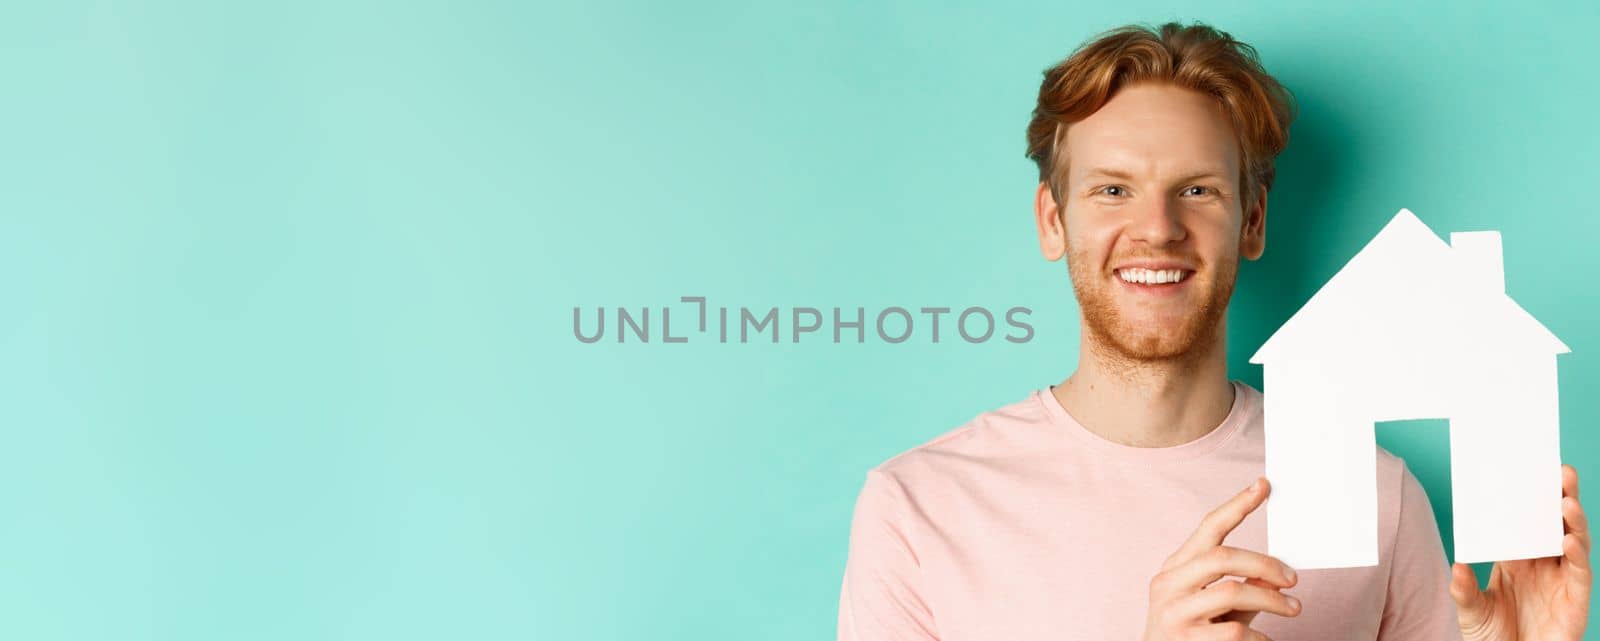 Real estate concept. Close up of redhead bearded man in t-shirt showing paper house cutout, smiling happy at camera, standing over turquoise background.